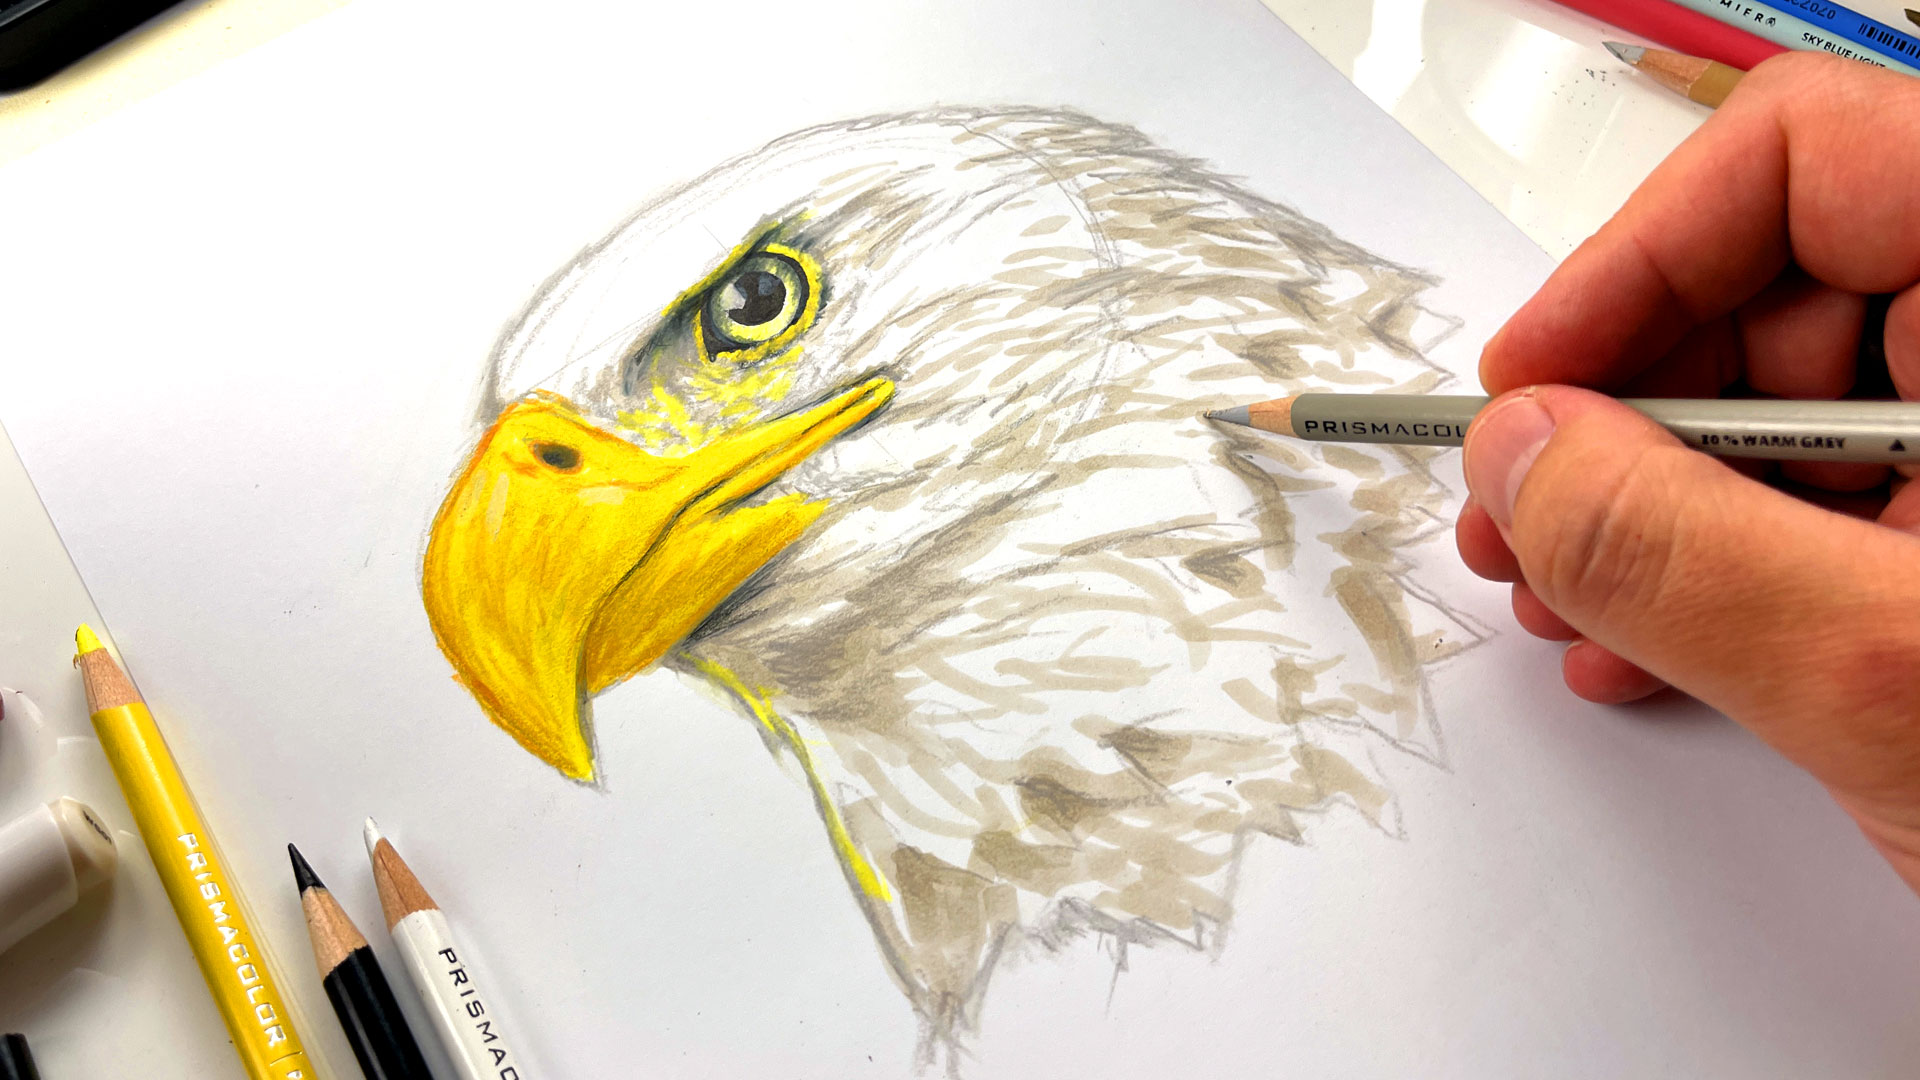 Eagle drawing | Eagle drawn in Faber Castell 9000 pencils Re… | Flickr